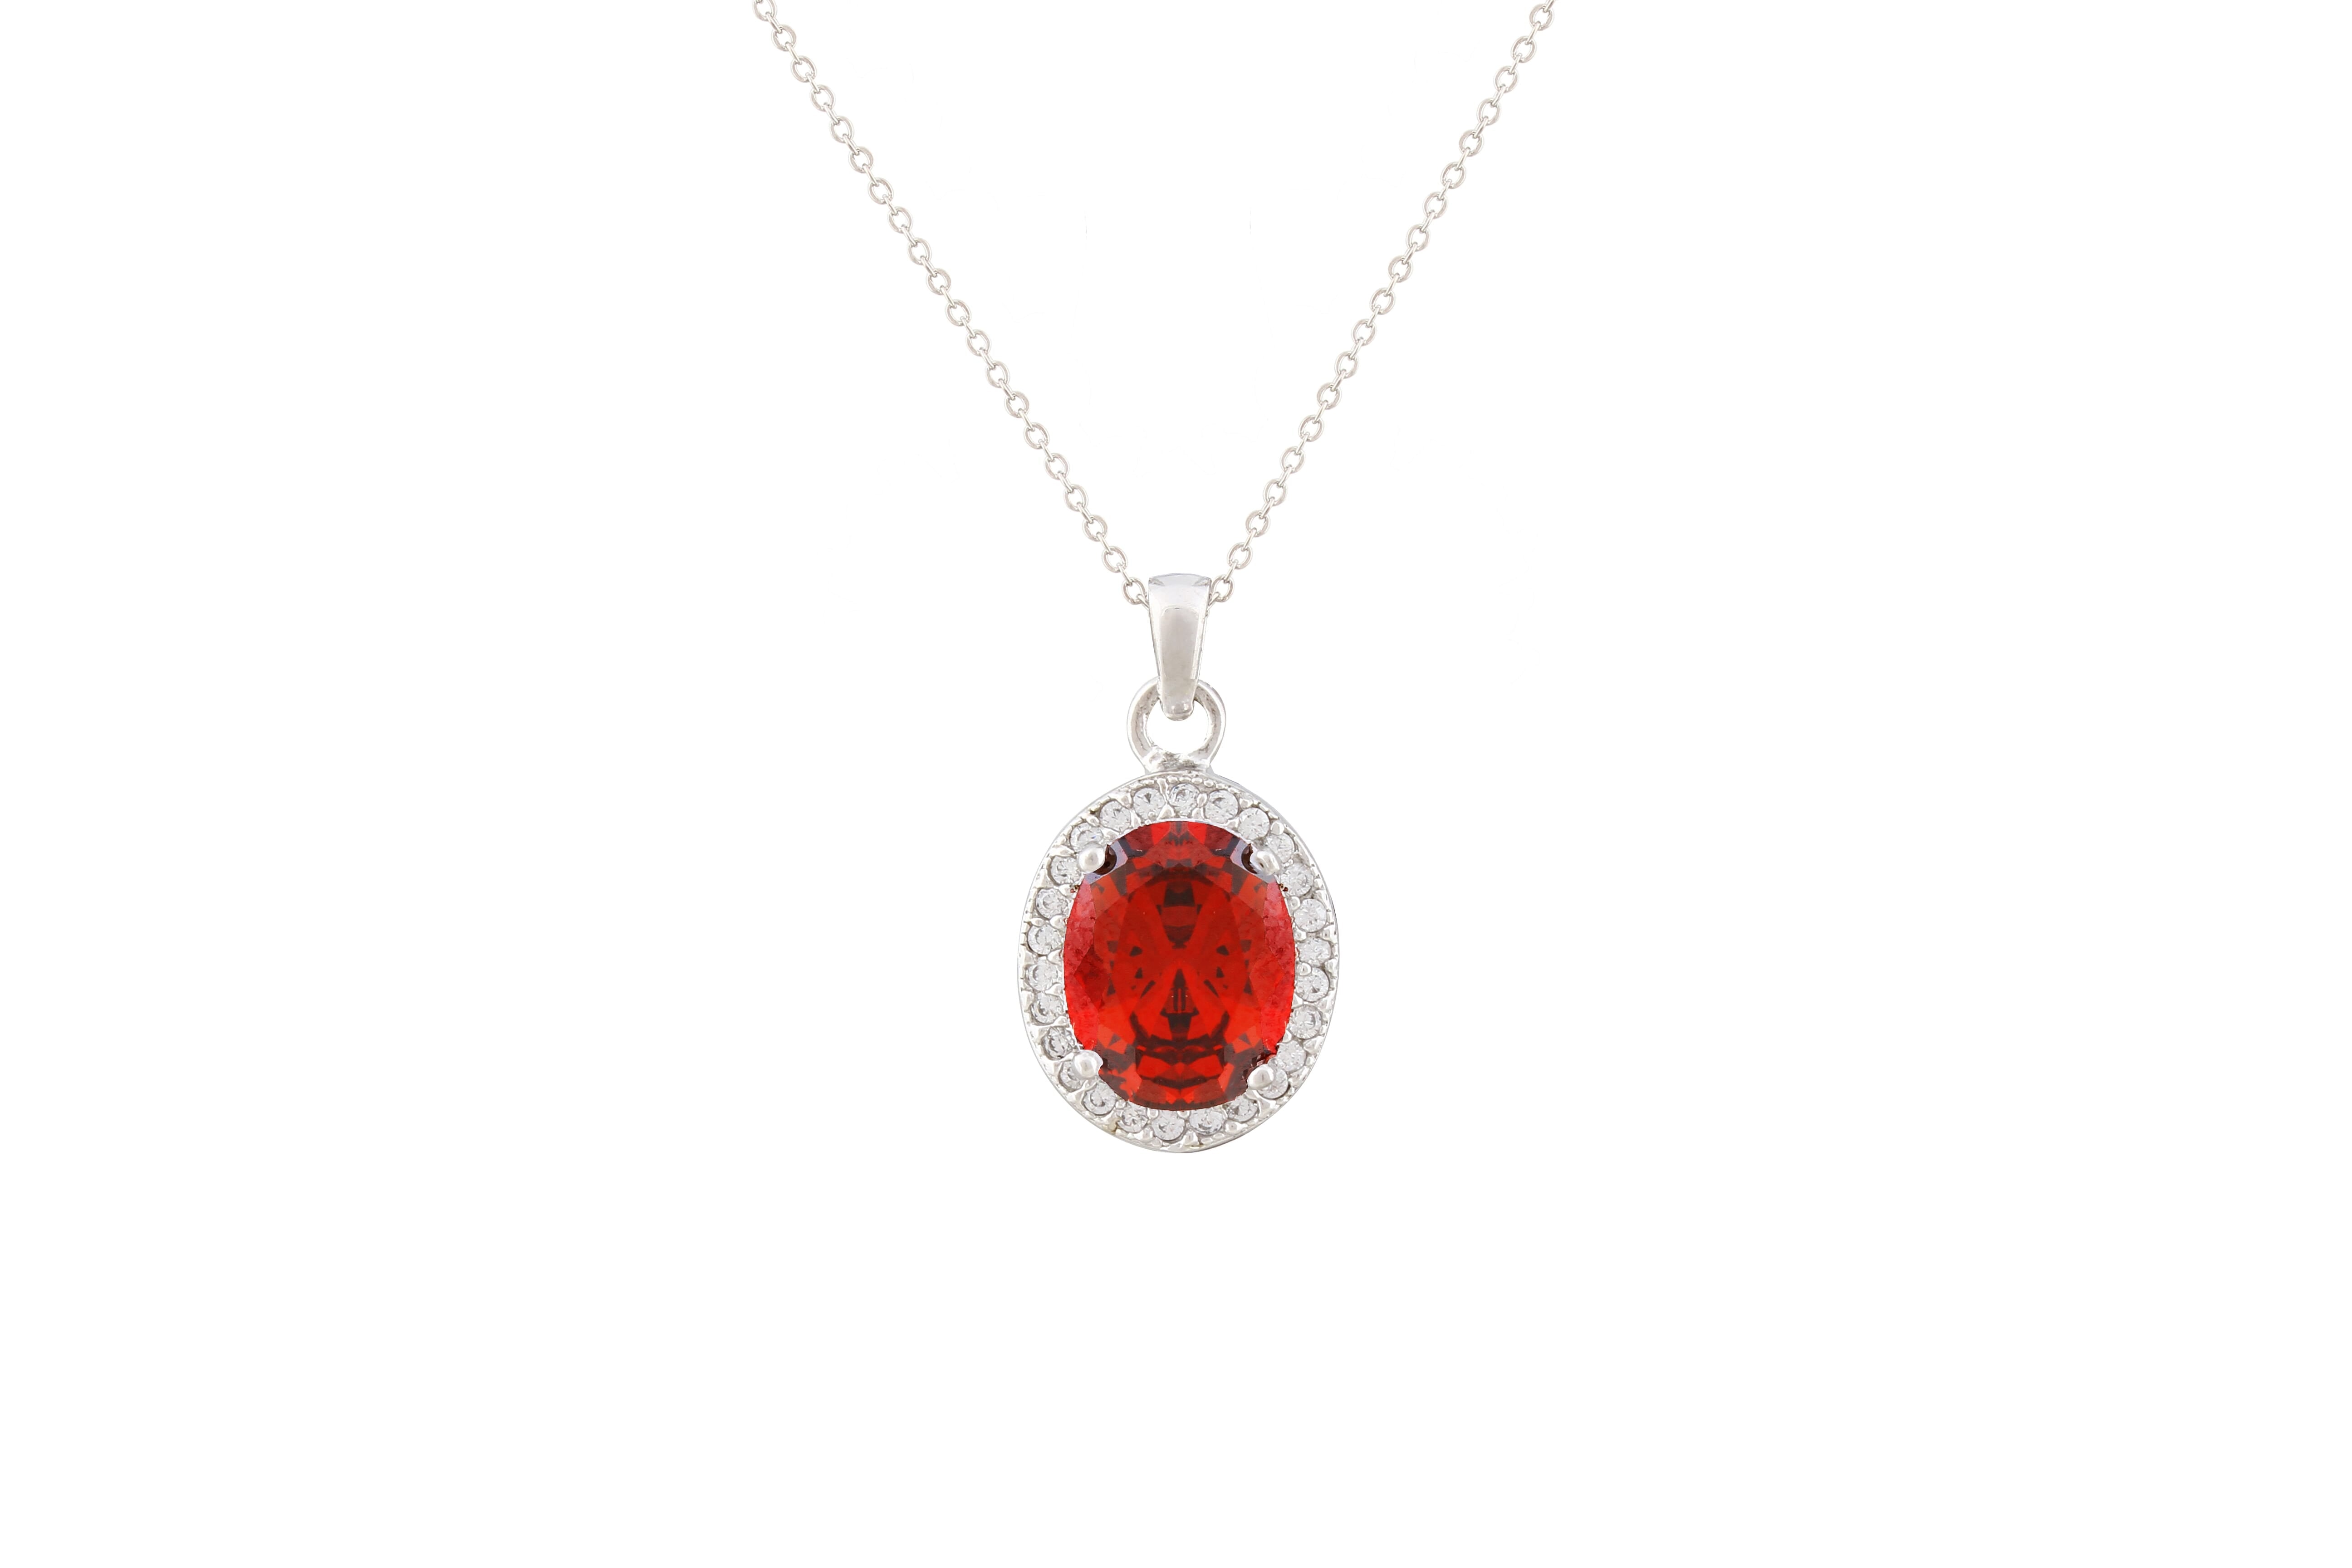 Asfour Crystal Chain Necklace With Red Oval Pendant In 925 Sterling Silver NA0005-R